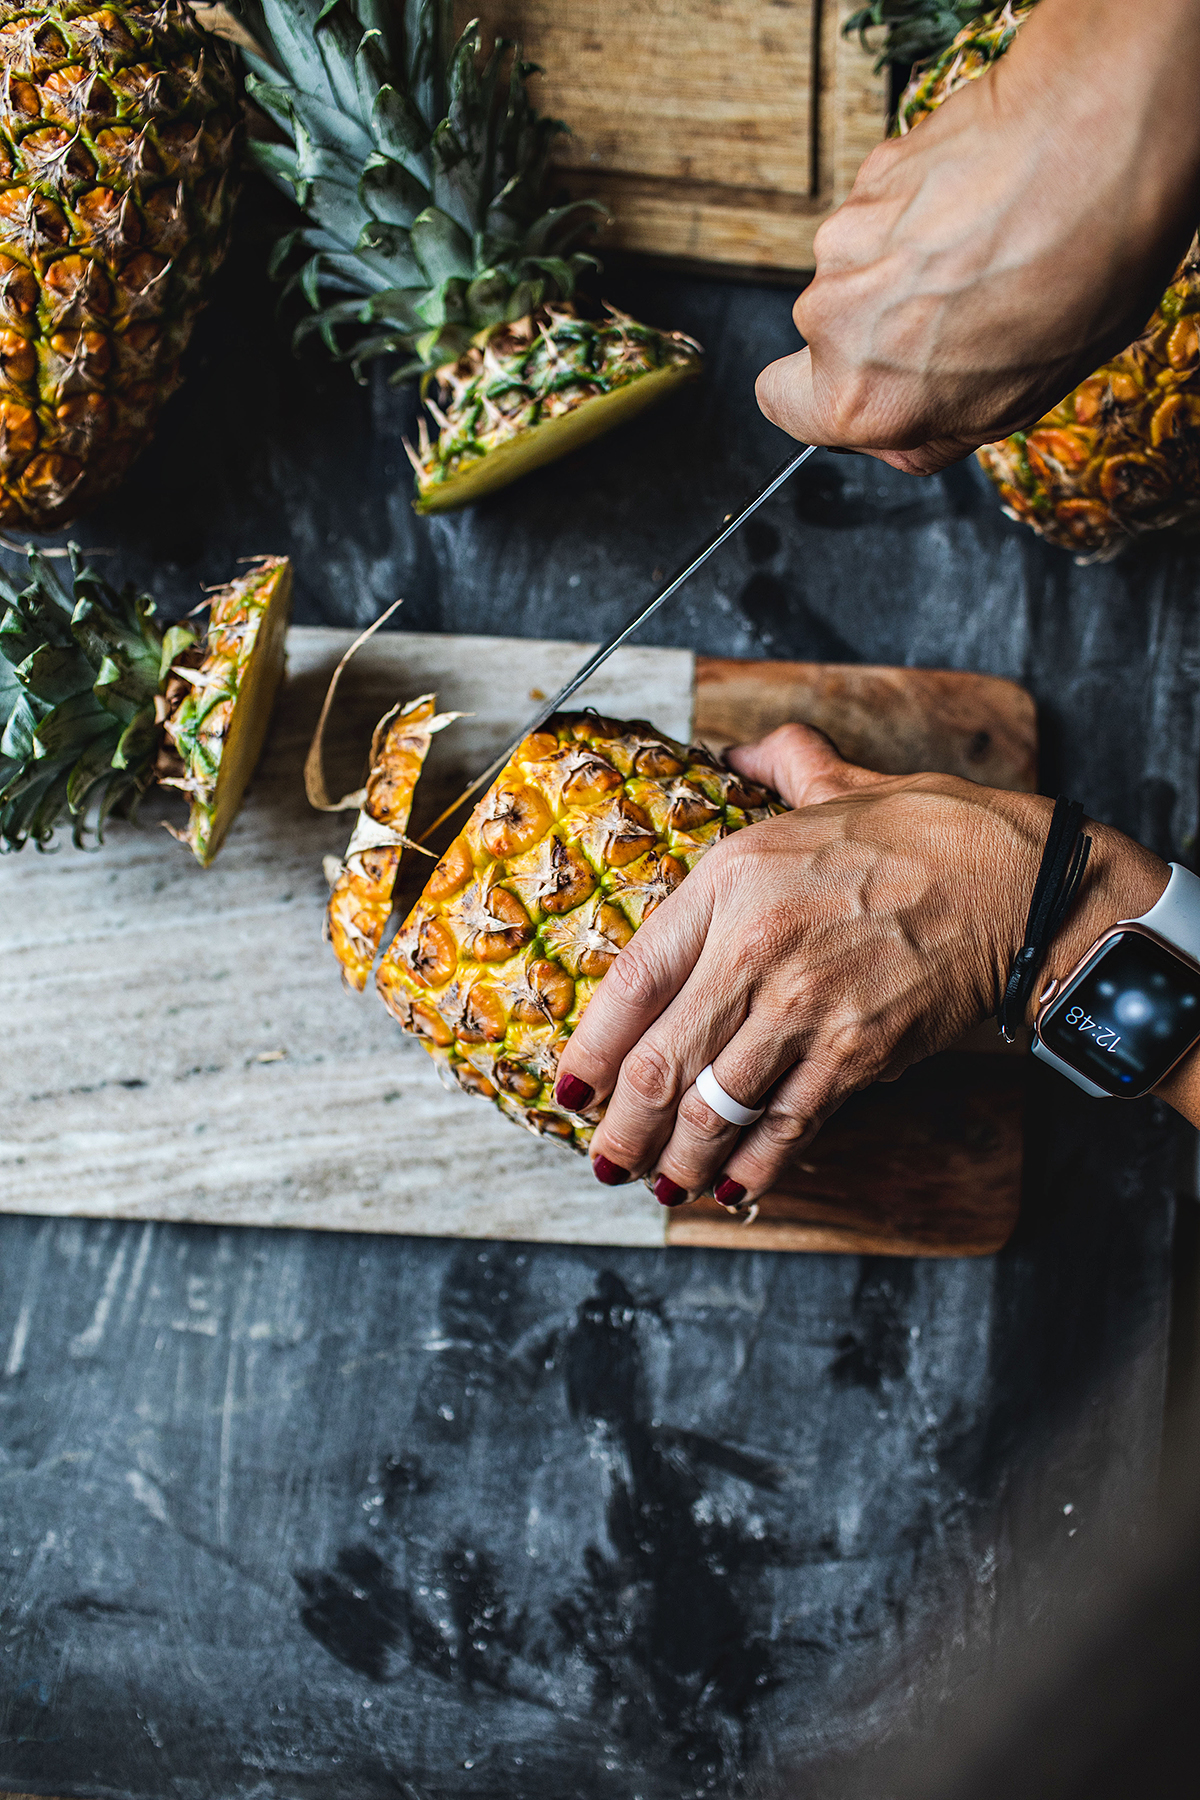 A hand and knife cutting pineapple.